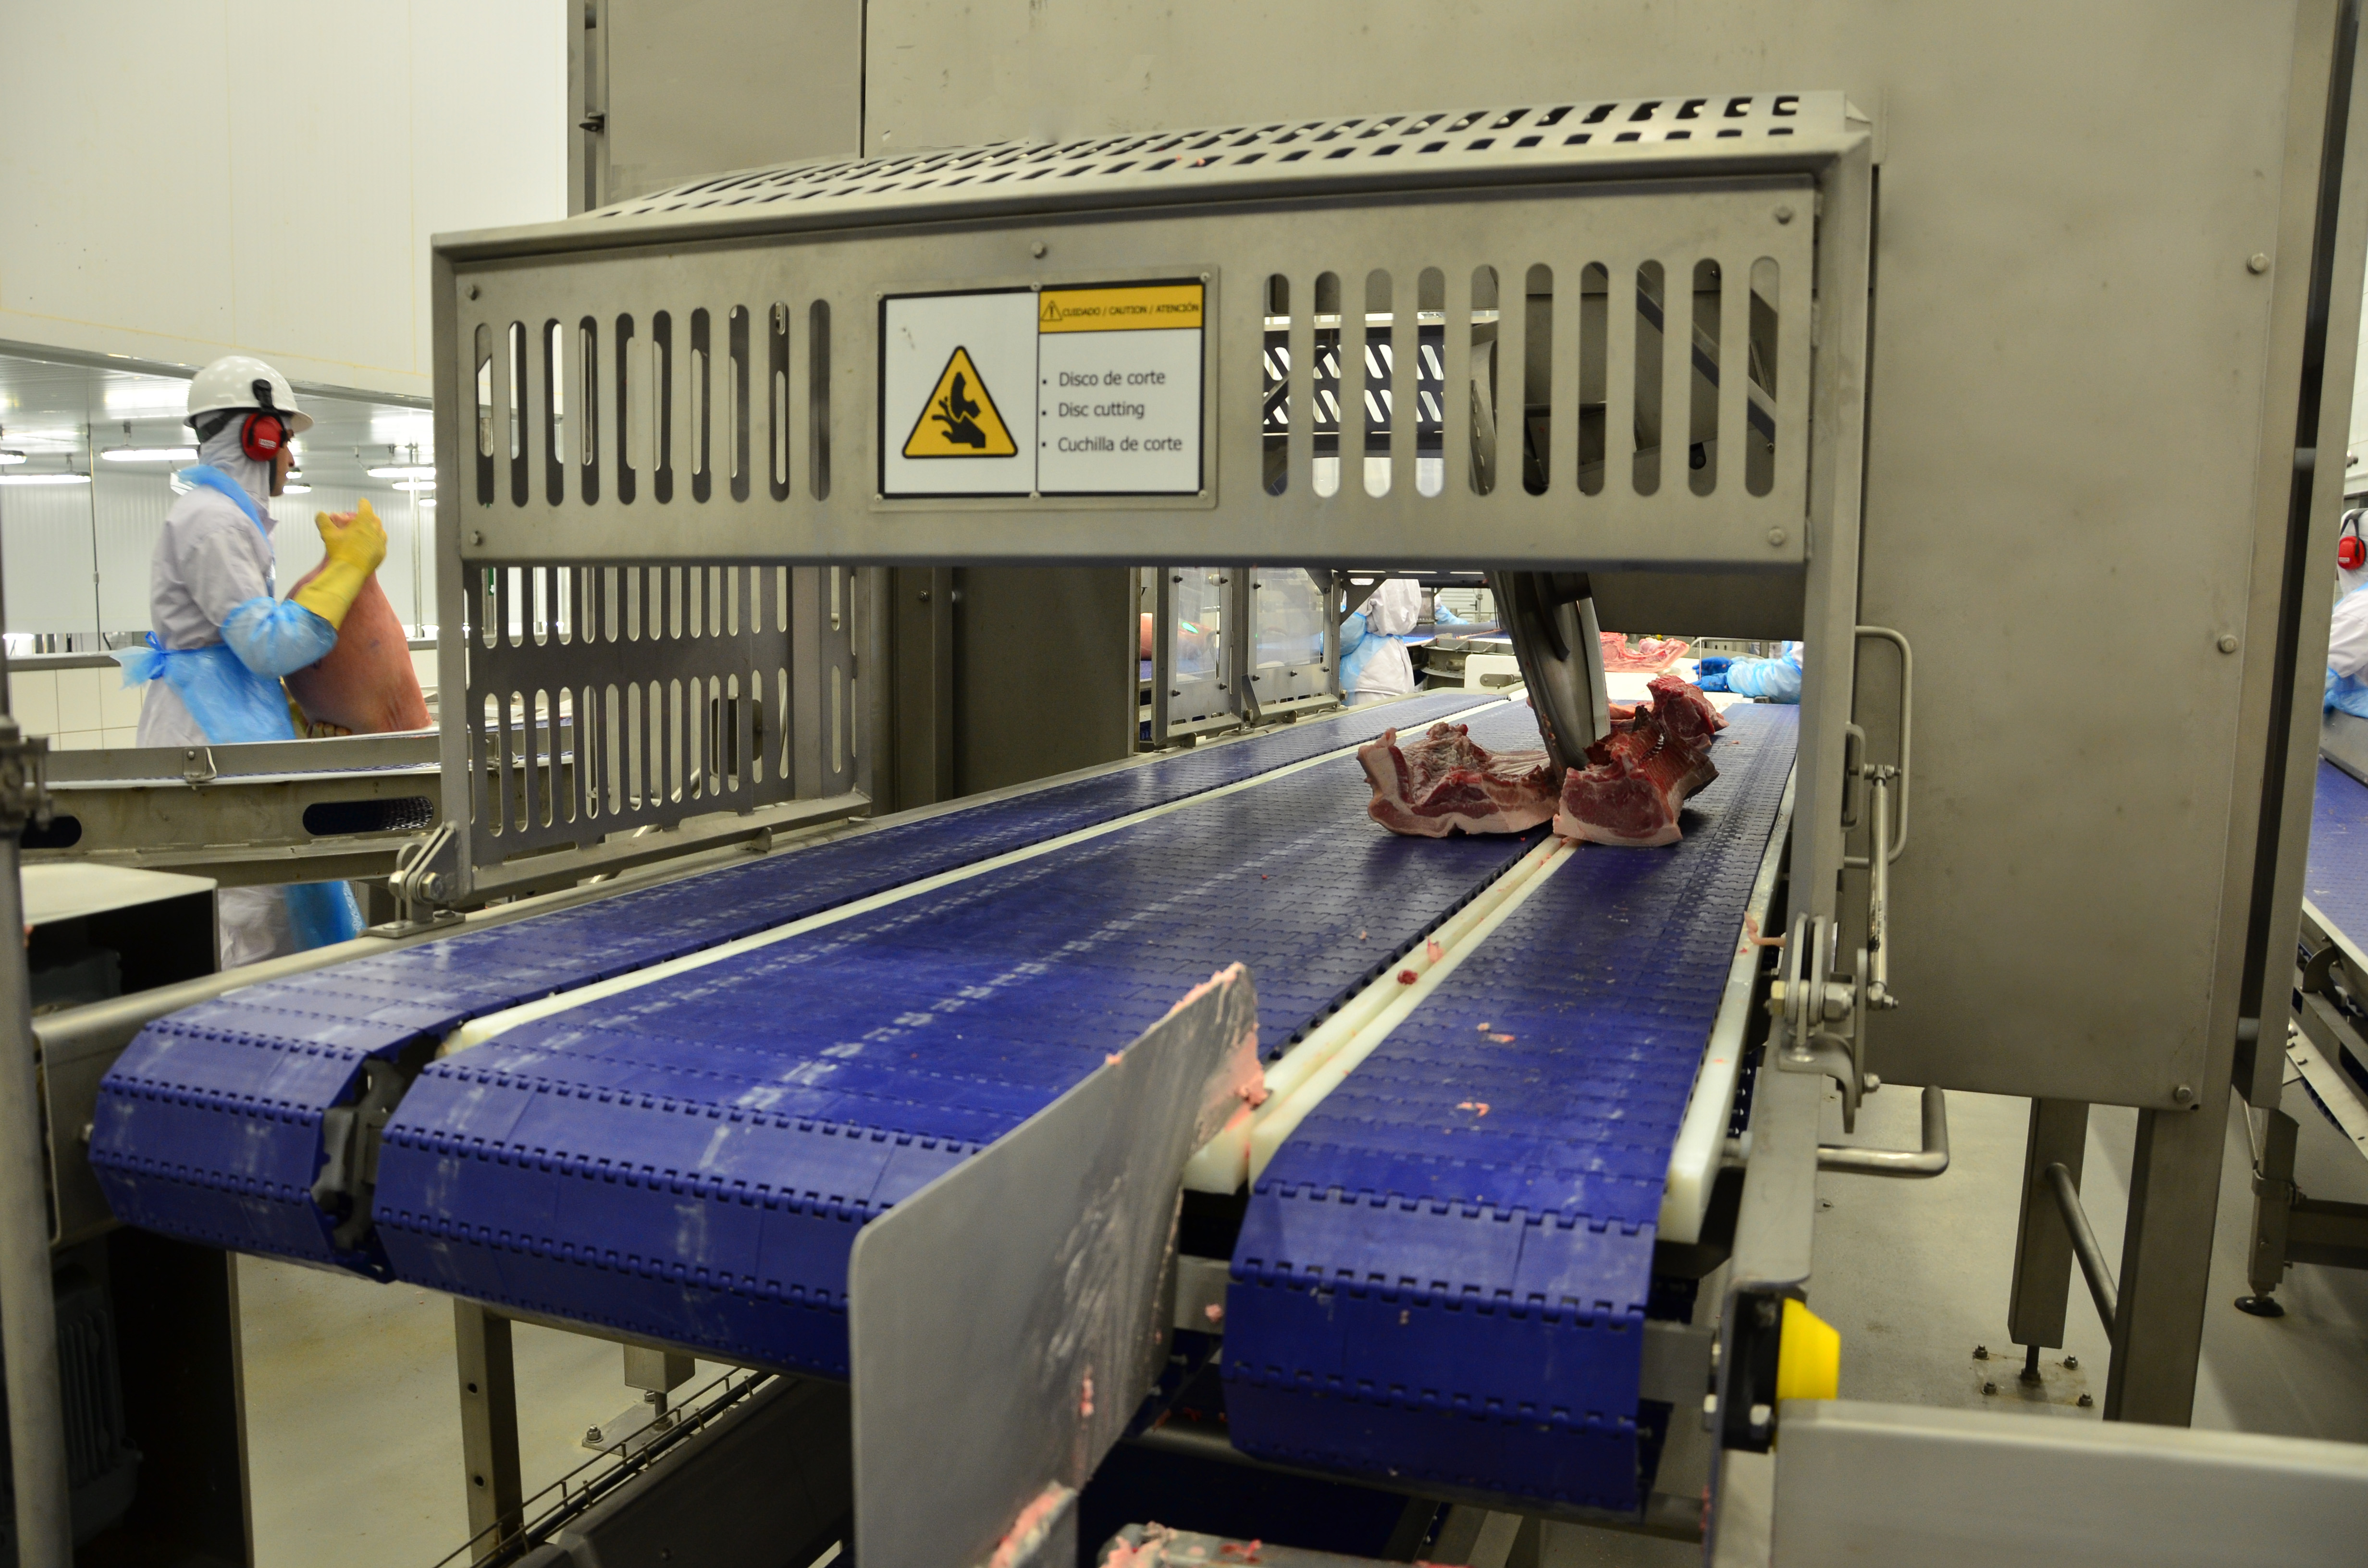 Carcass Cutter For Primal Cutting System In Pork Processing